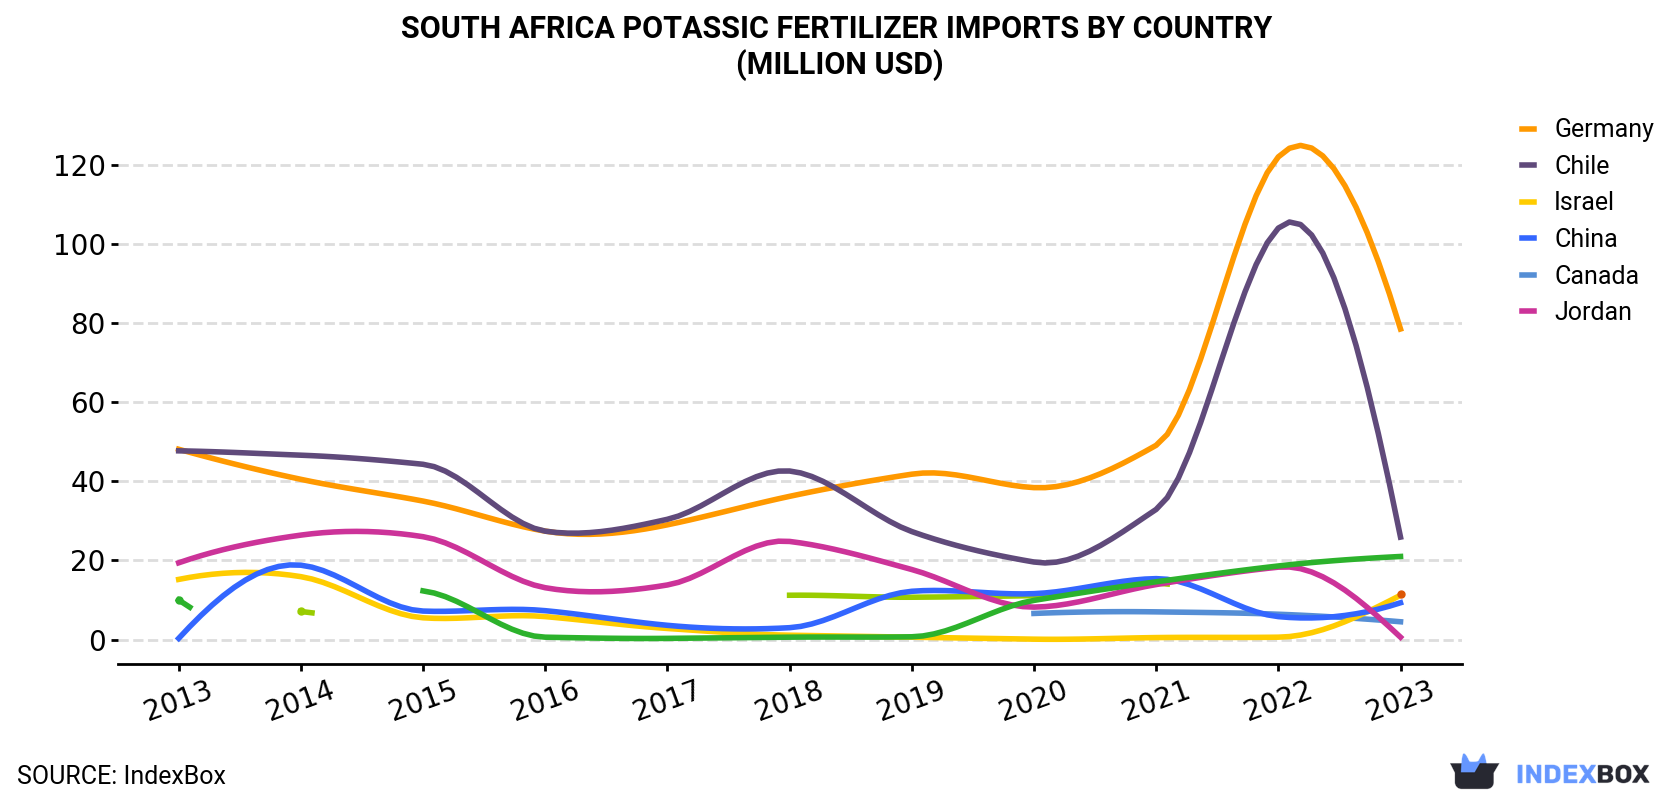 South Africa Potassic Fertilizer Imports By Country (Million USD)